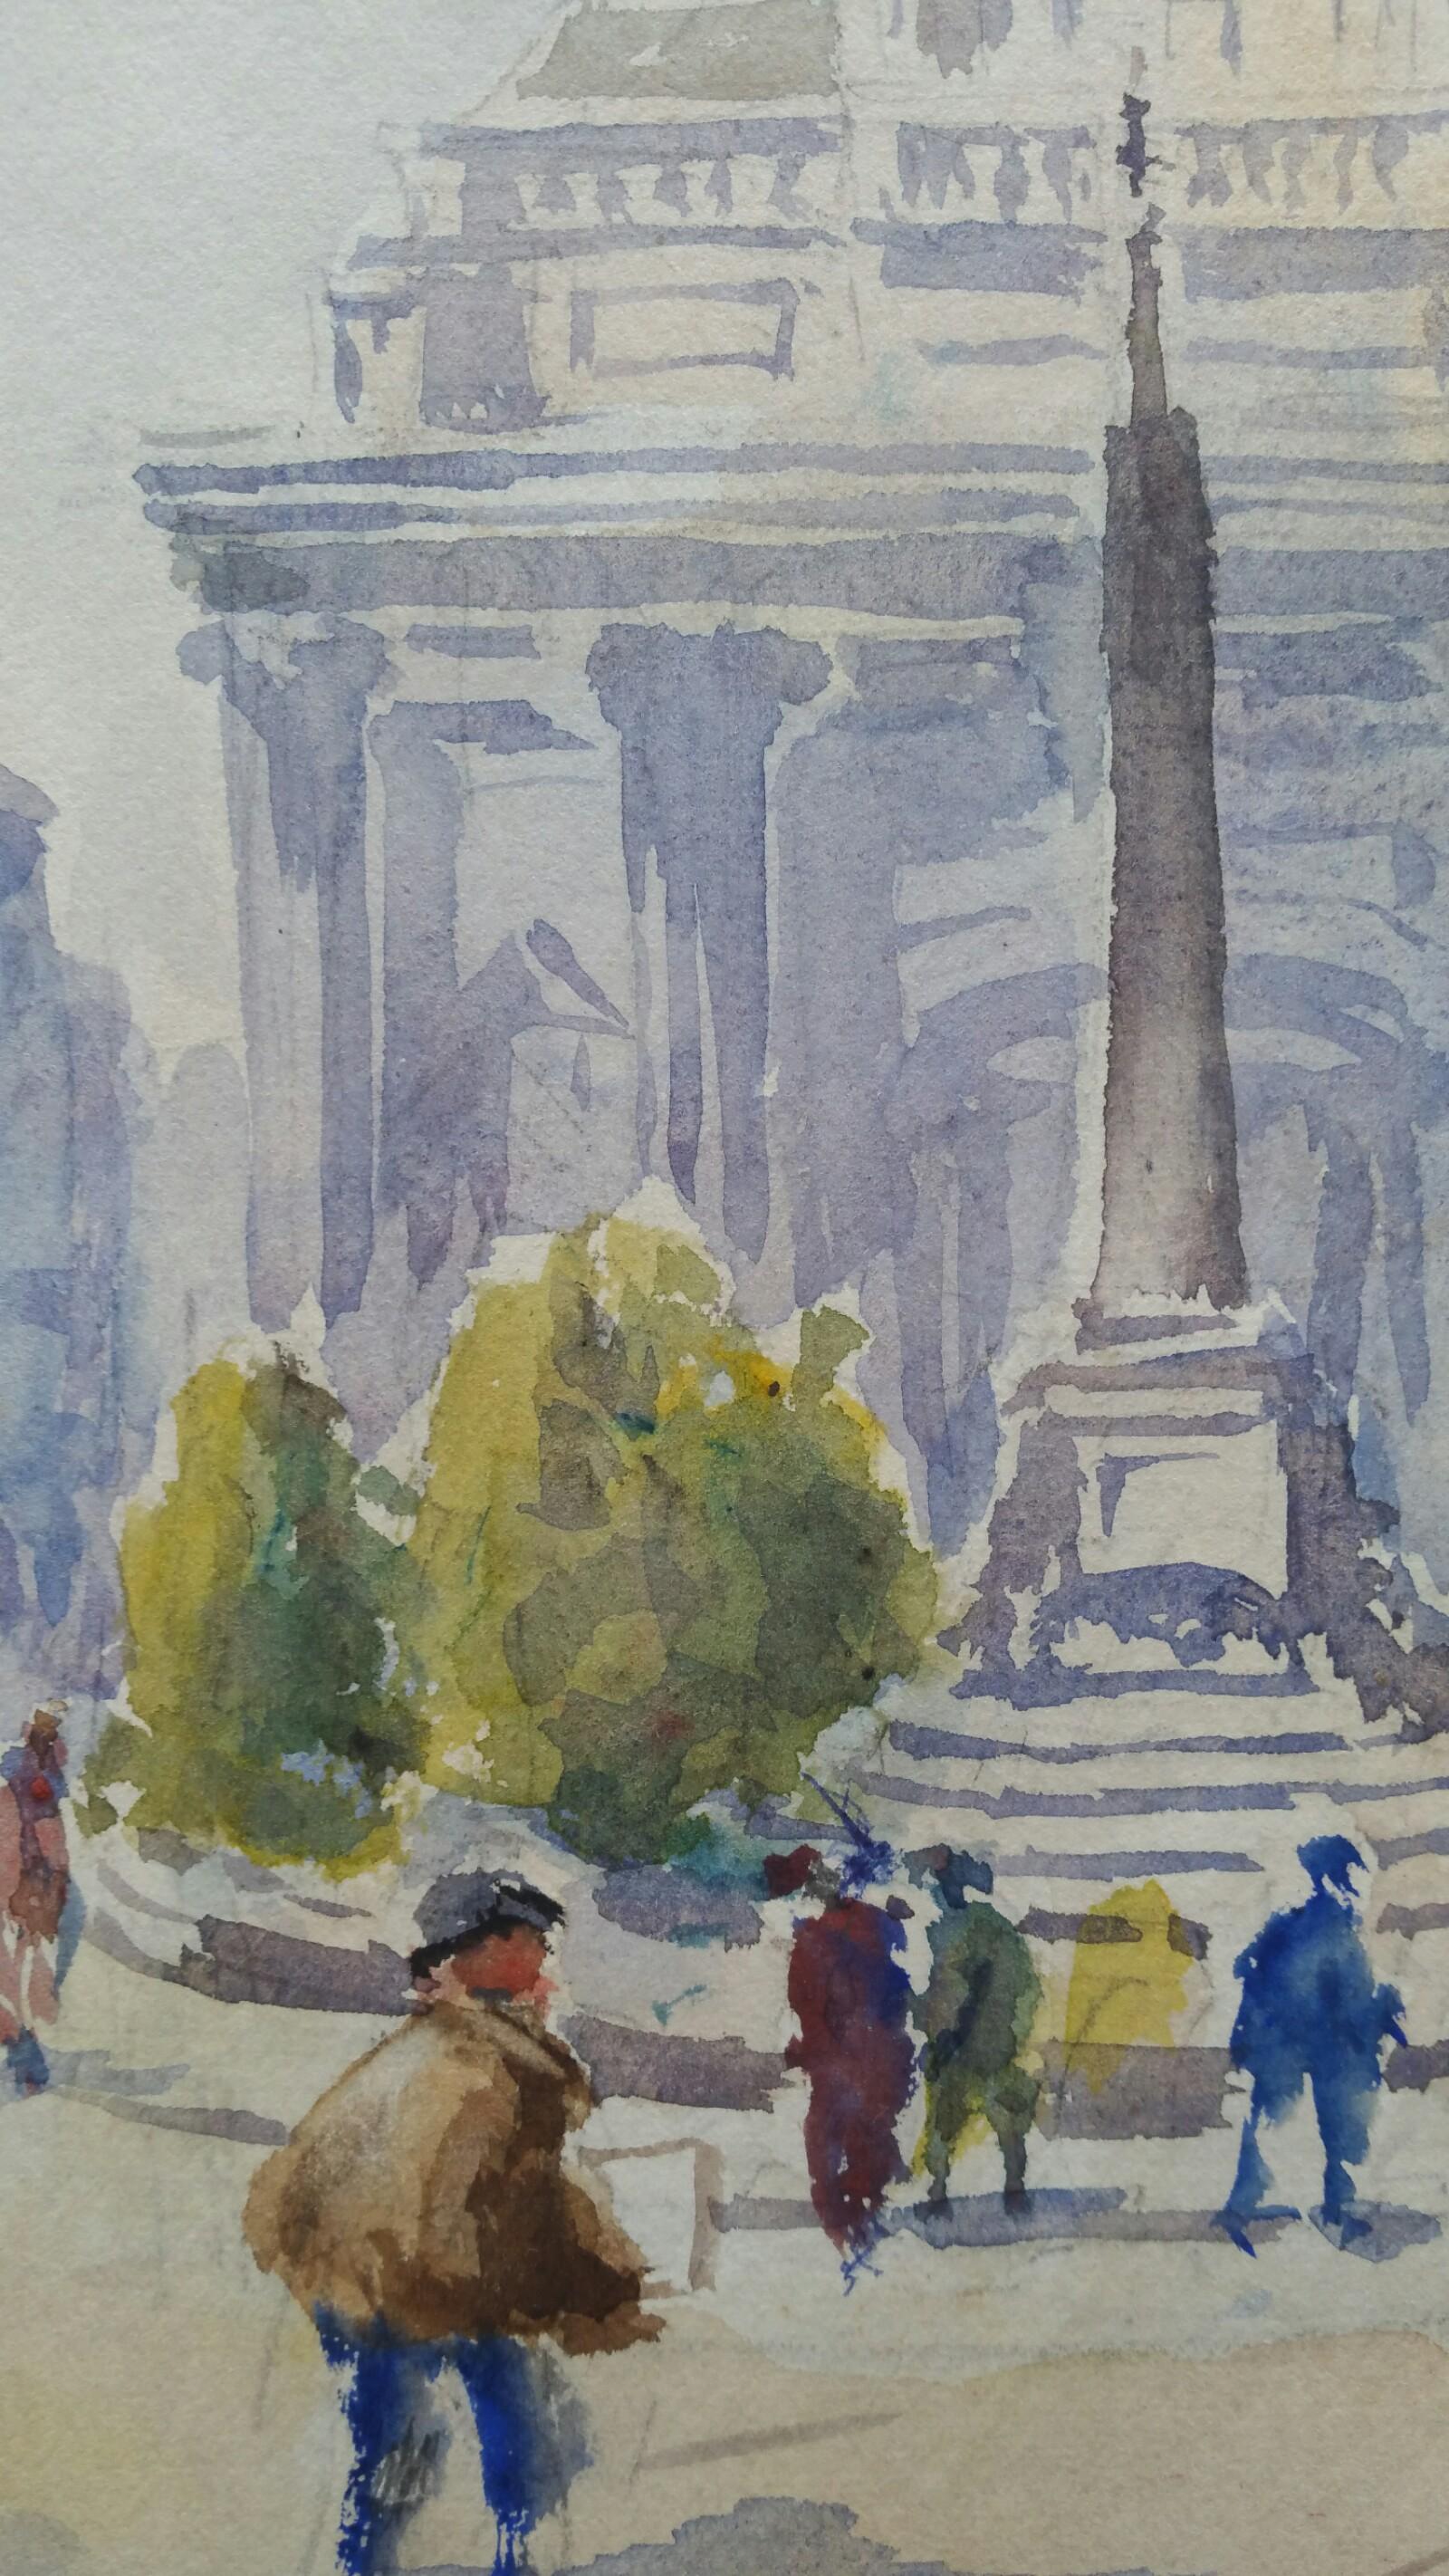 Brussels: Belgium. De Brouckere Square and the Jules Anspach Obelisk
by Leonard Machin Rowe (1880-1968)
signed lower left
watercolour painting on artist's paper, unframed

Sheet: 9.75 x 13.75 inches

Delightful painting by Leon. Rowe. It is